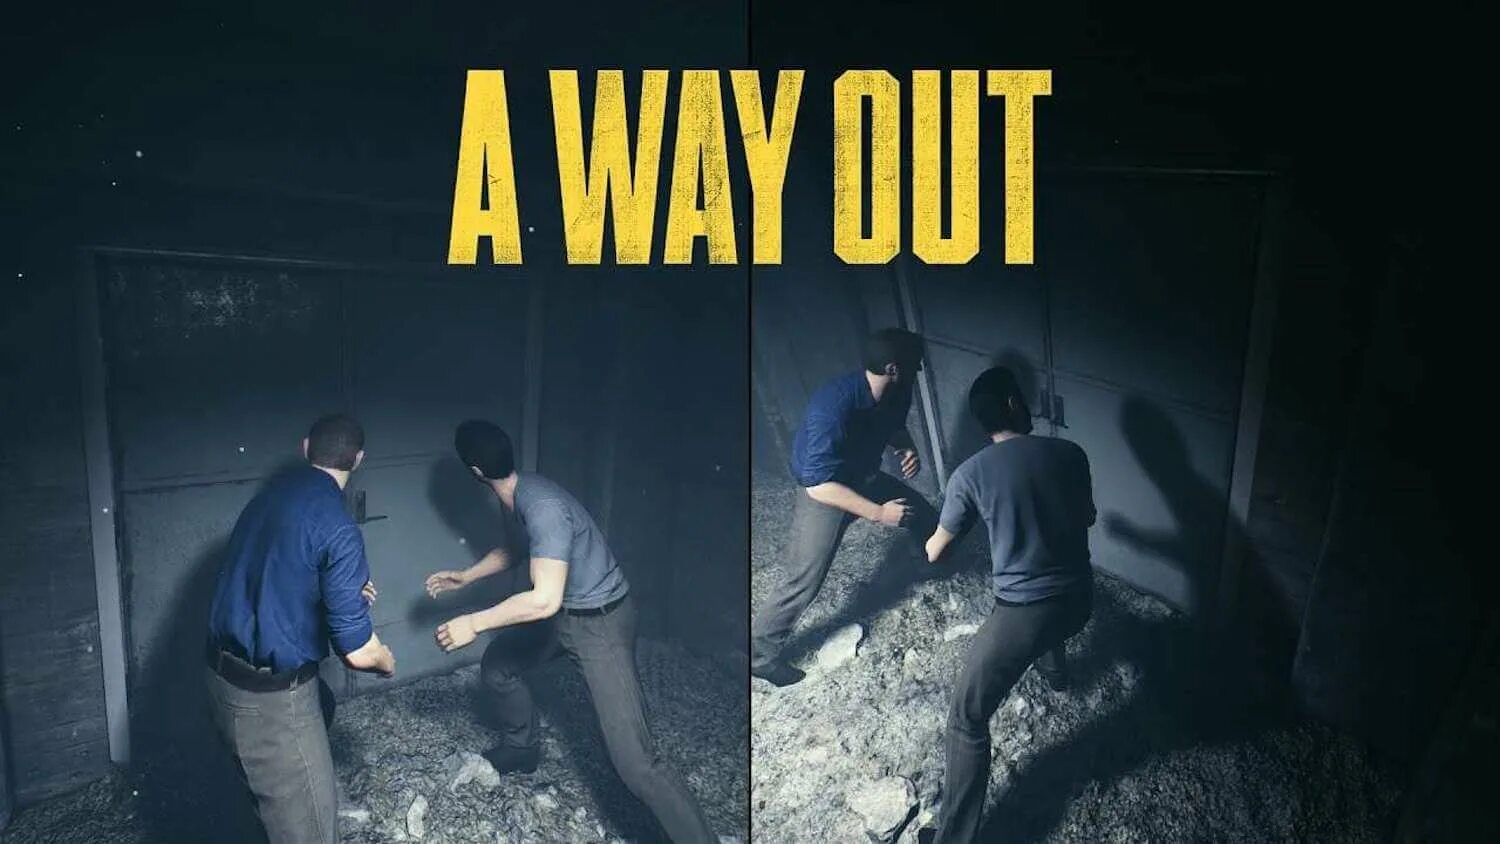 Э Вэй аут. A way out ps3. Away out игра. A way out геймплей. We are the way out